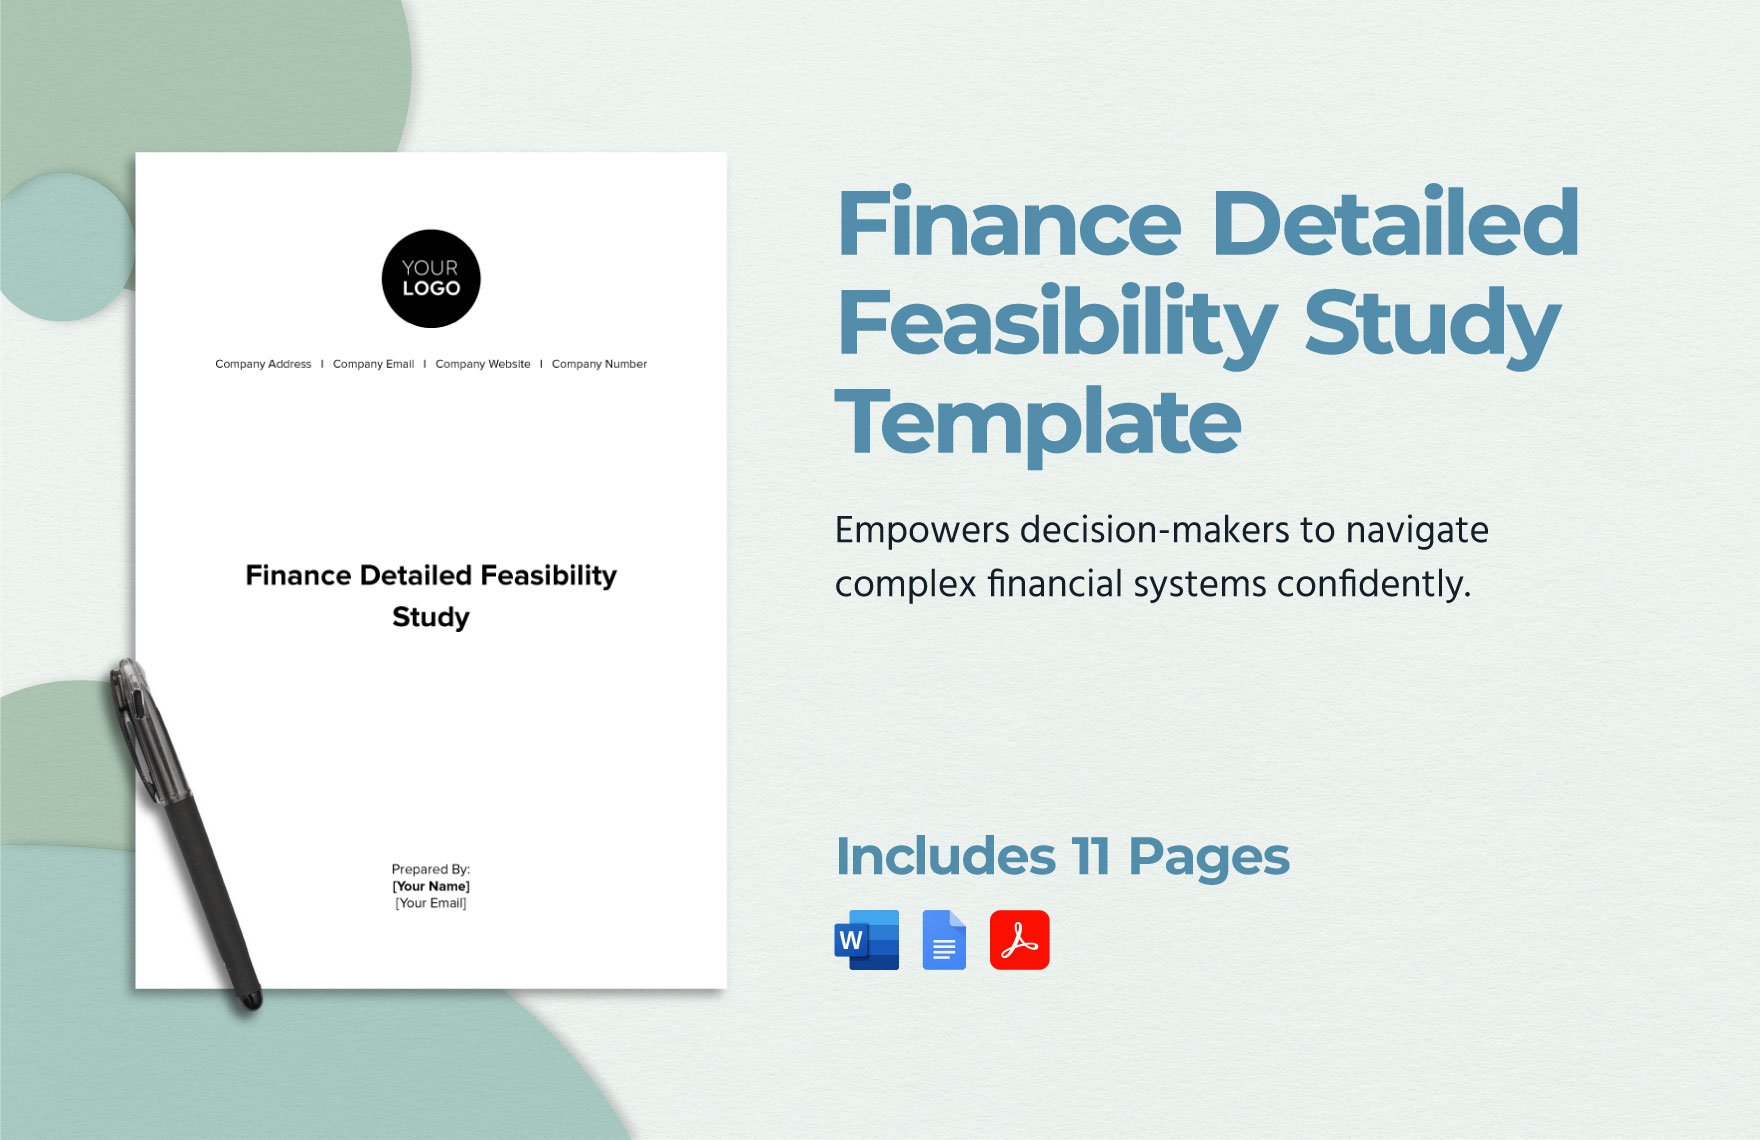 Finance Detailed Feasibility Study Template